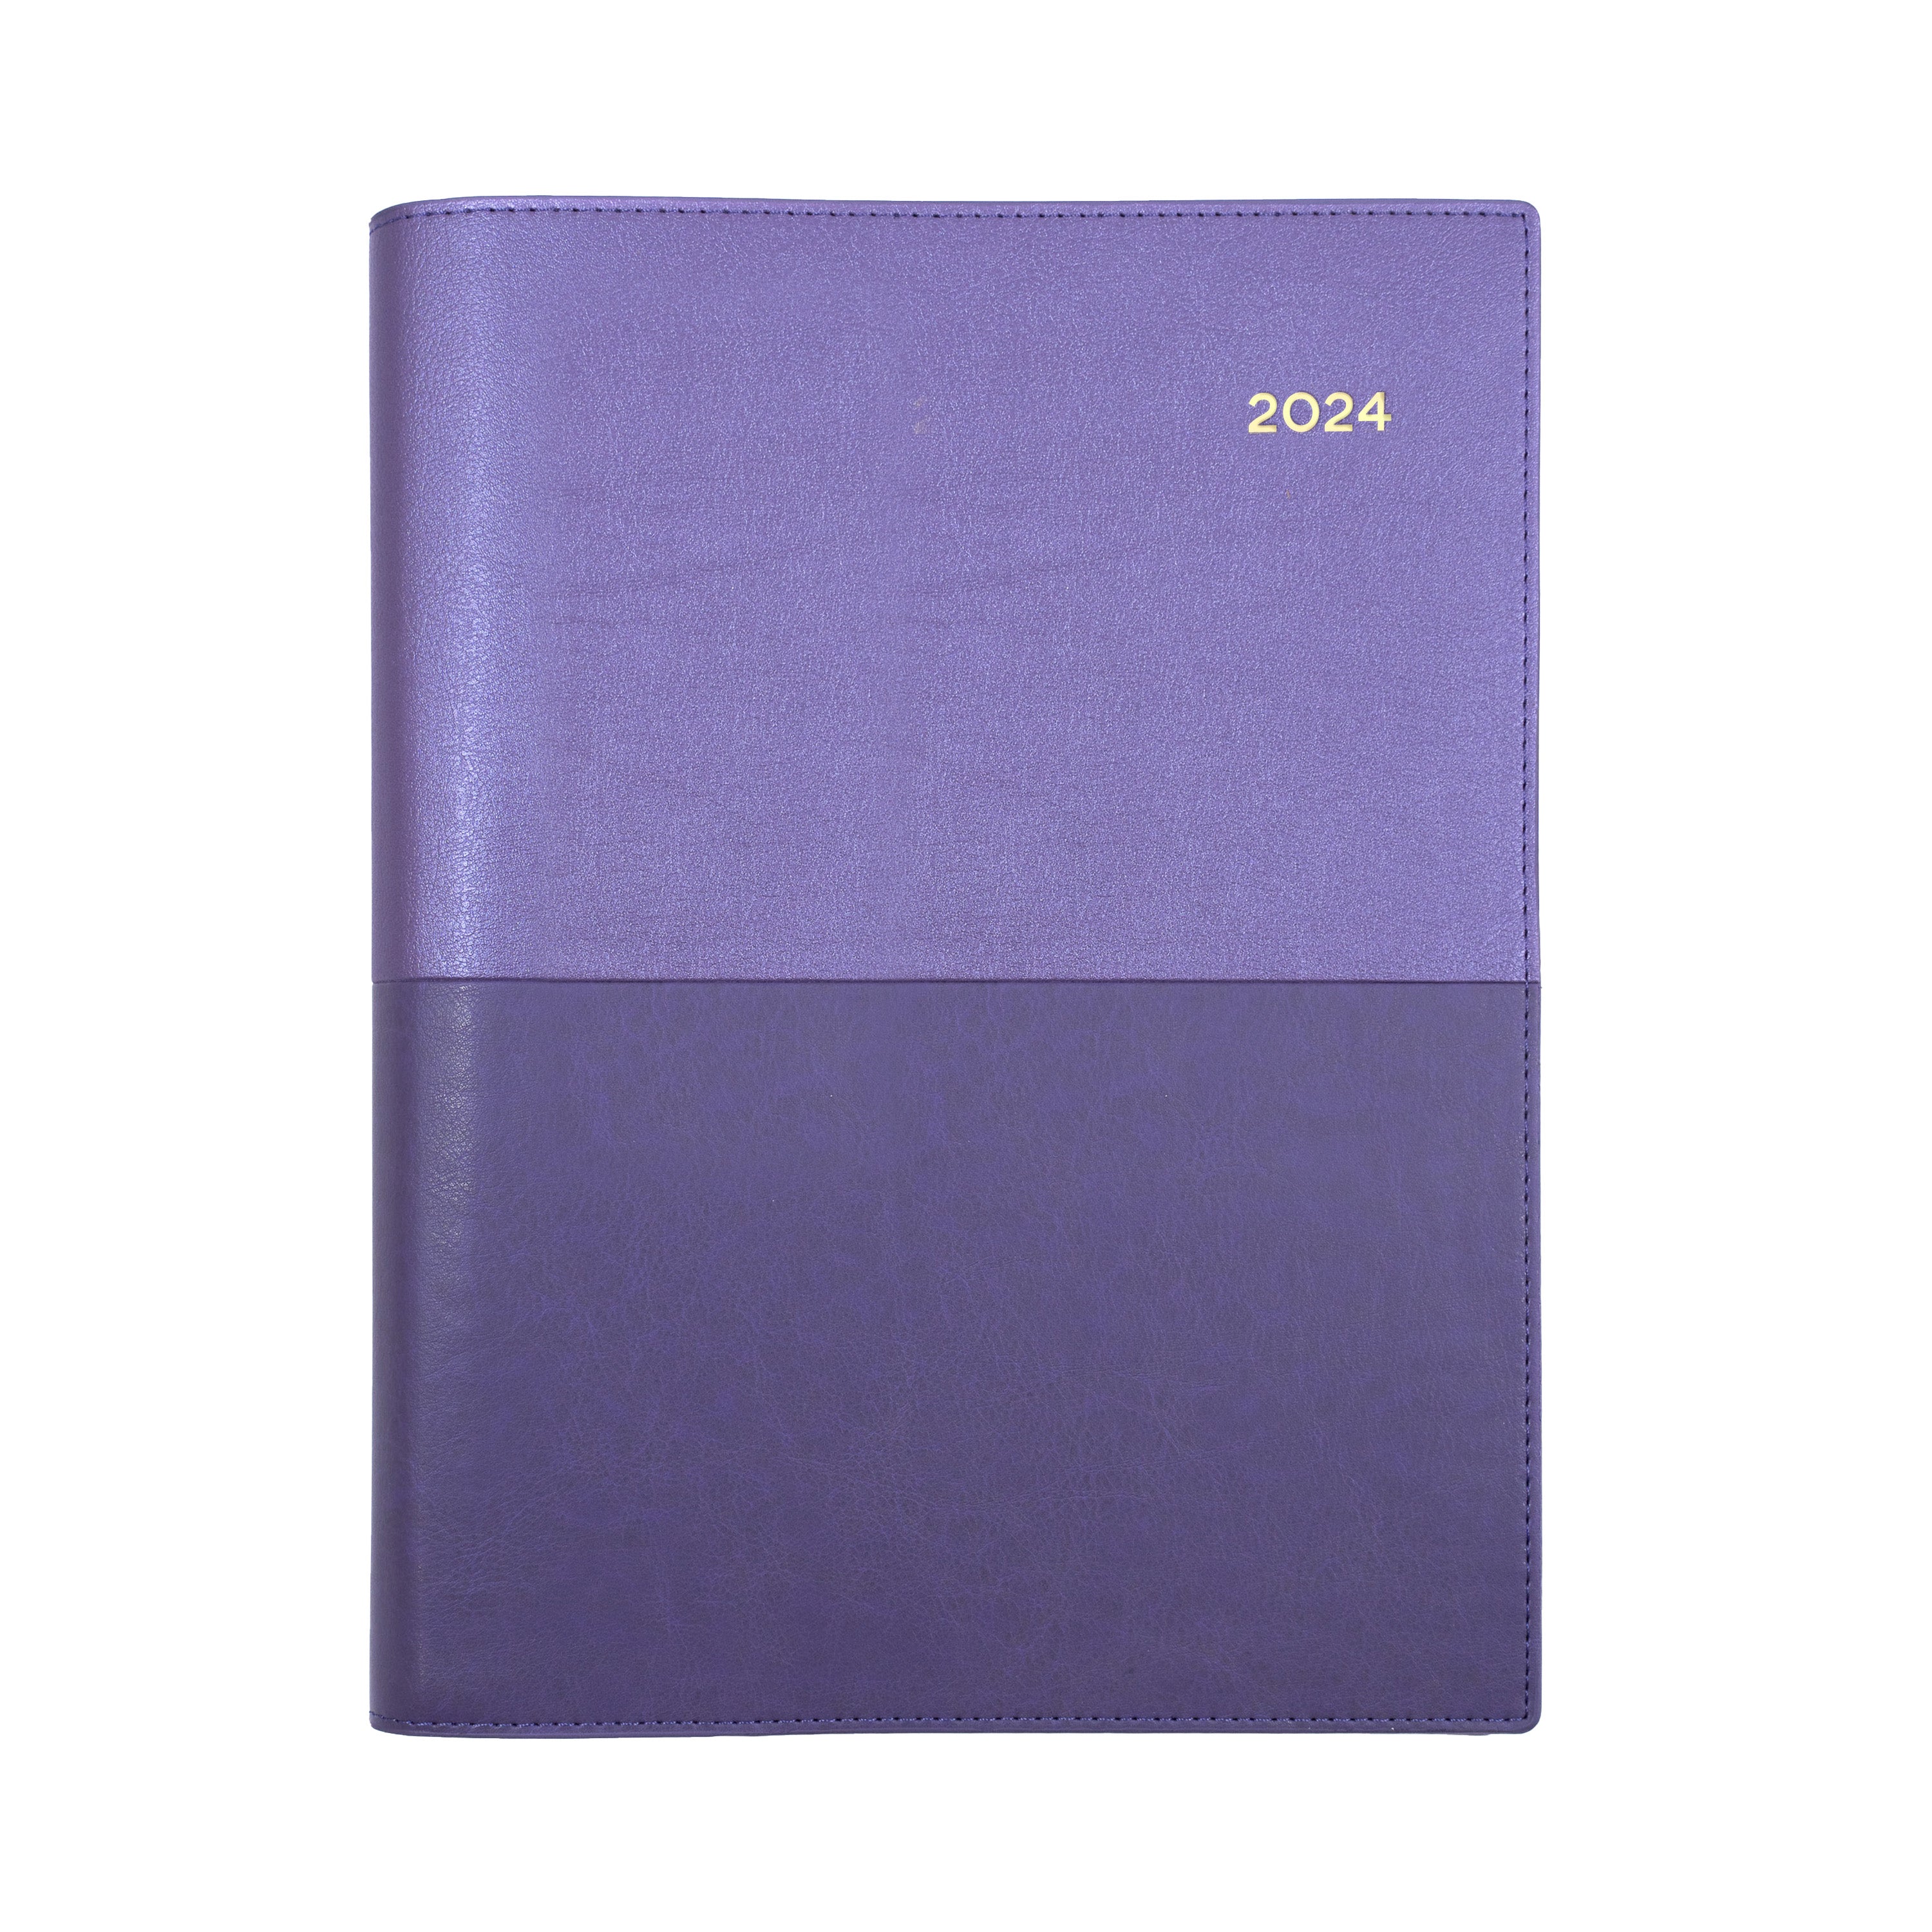 Collins Vanessa 2024 Diary - Week to View (9am - 5pm, hourly)